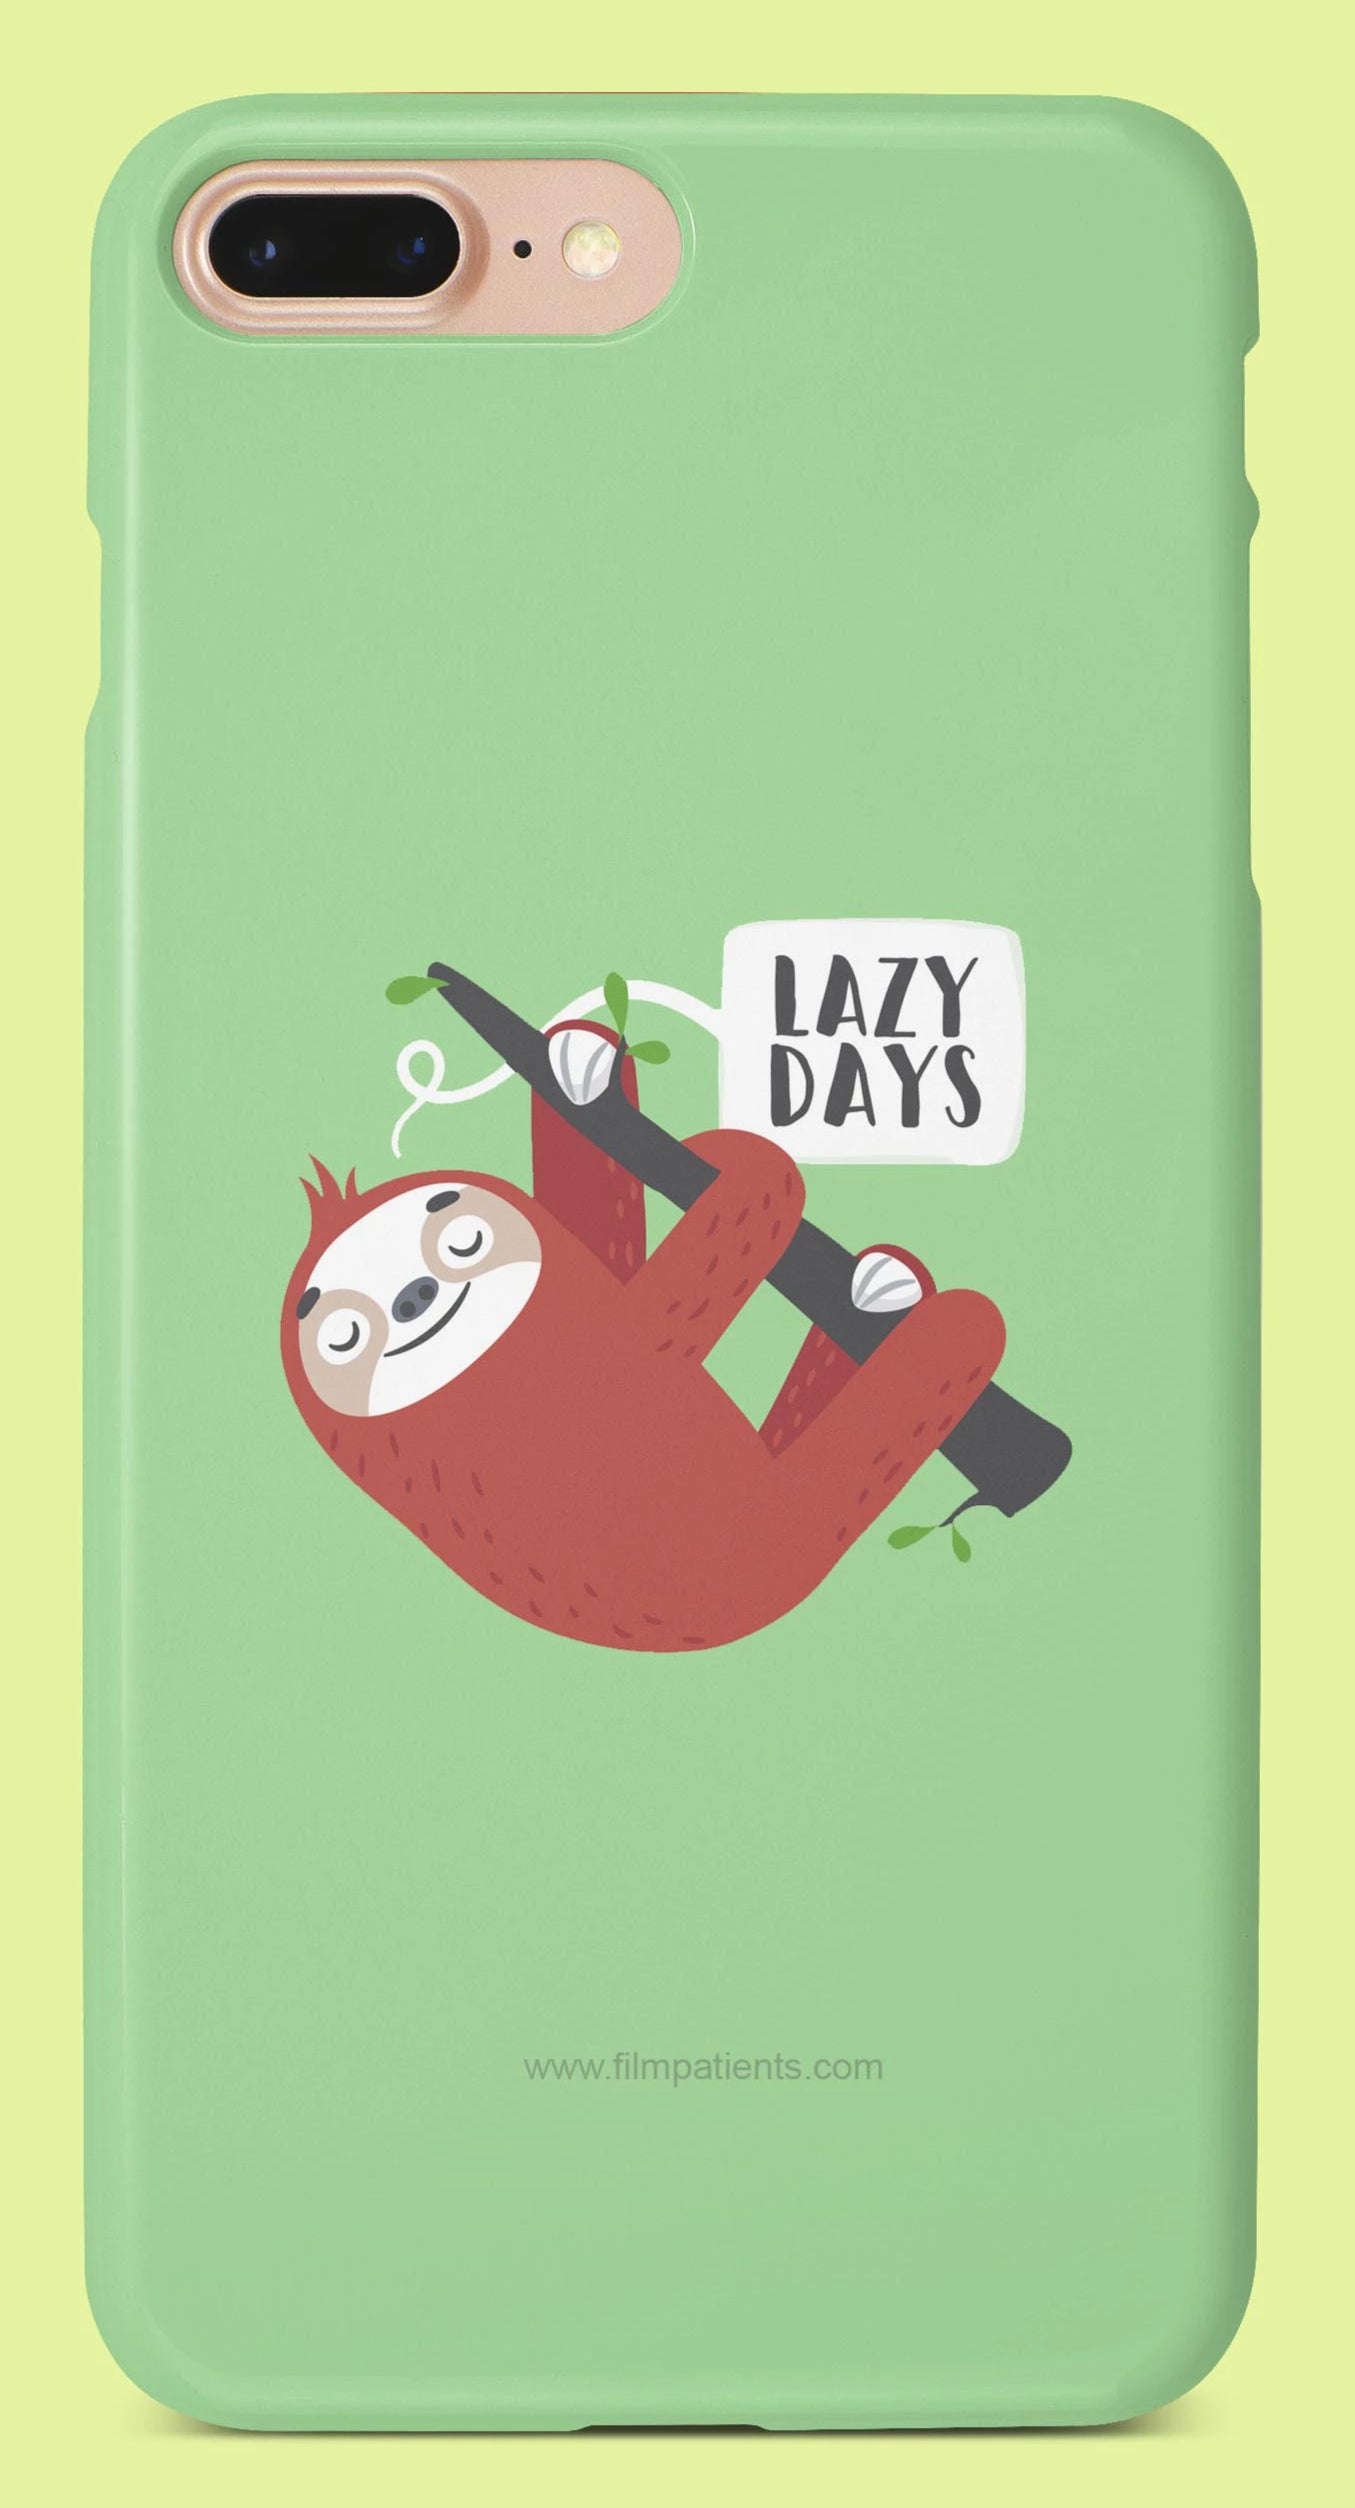 Lazy Days Mobile Cover | Film Patients